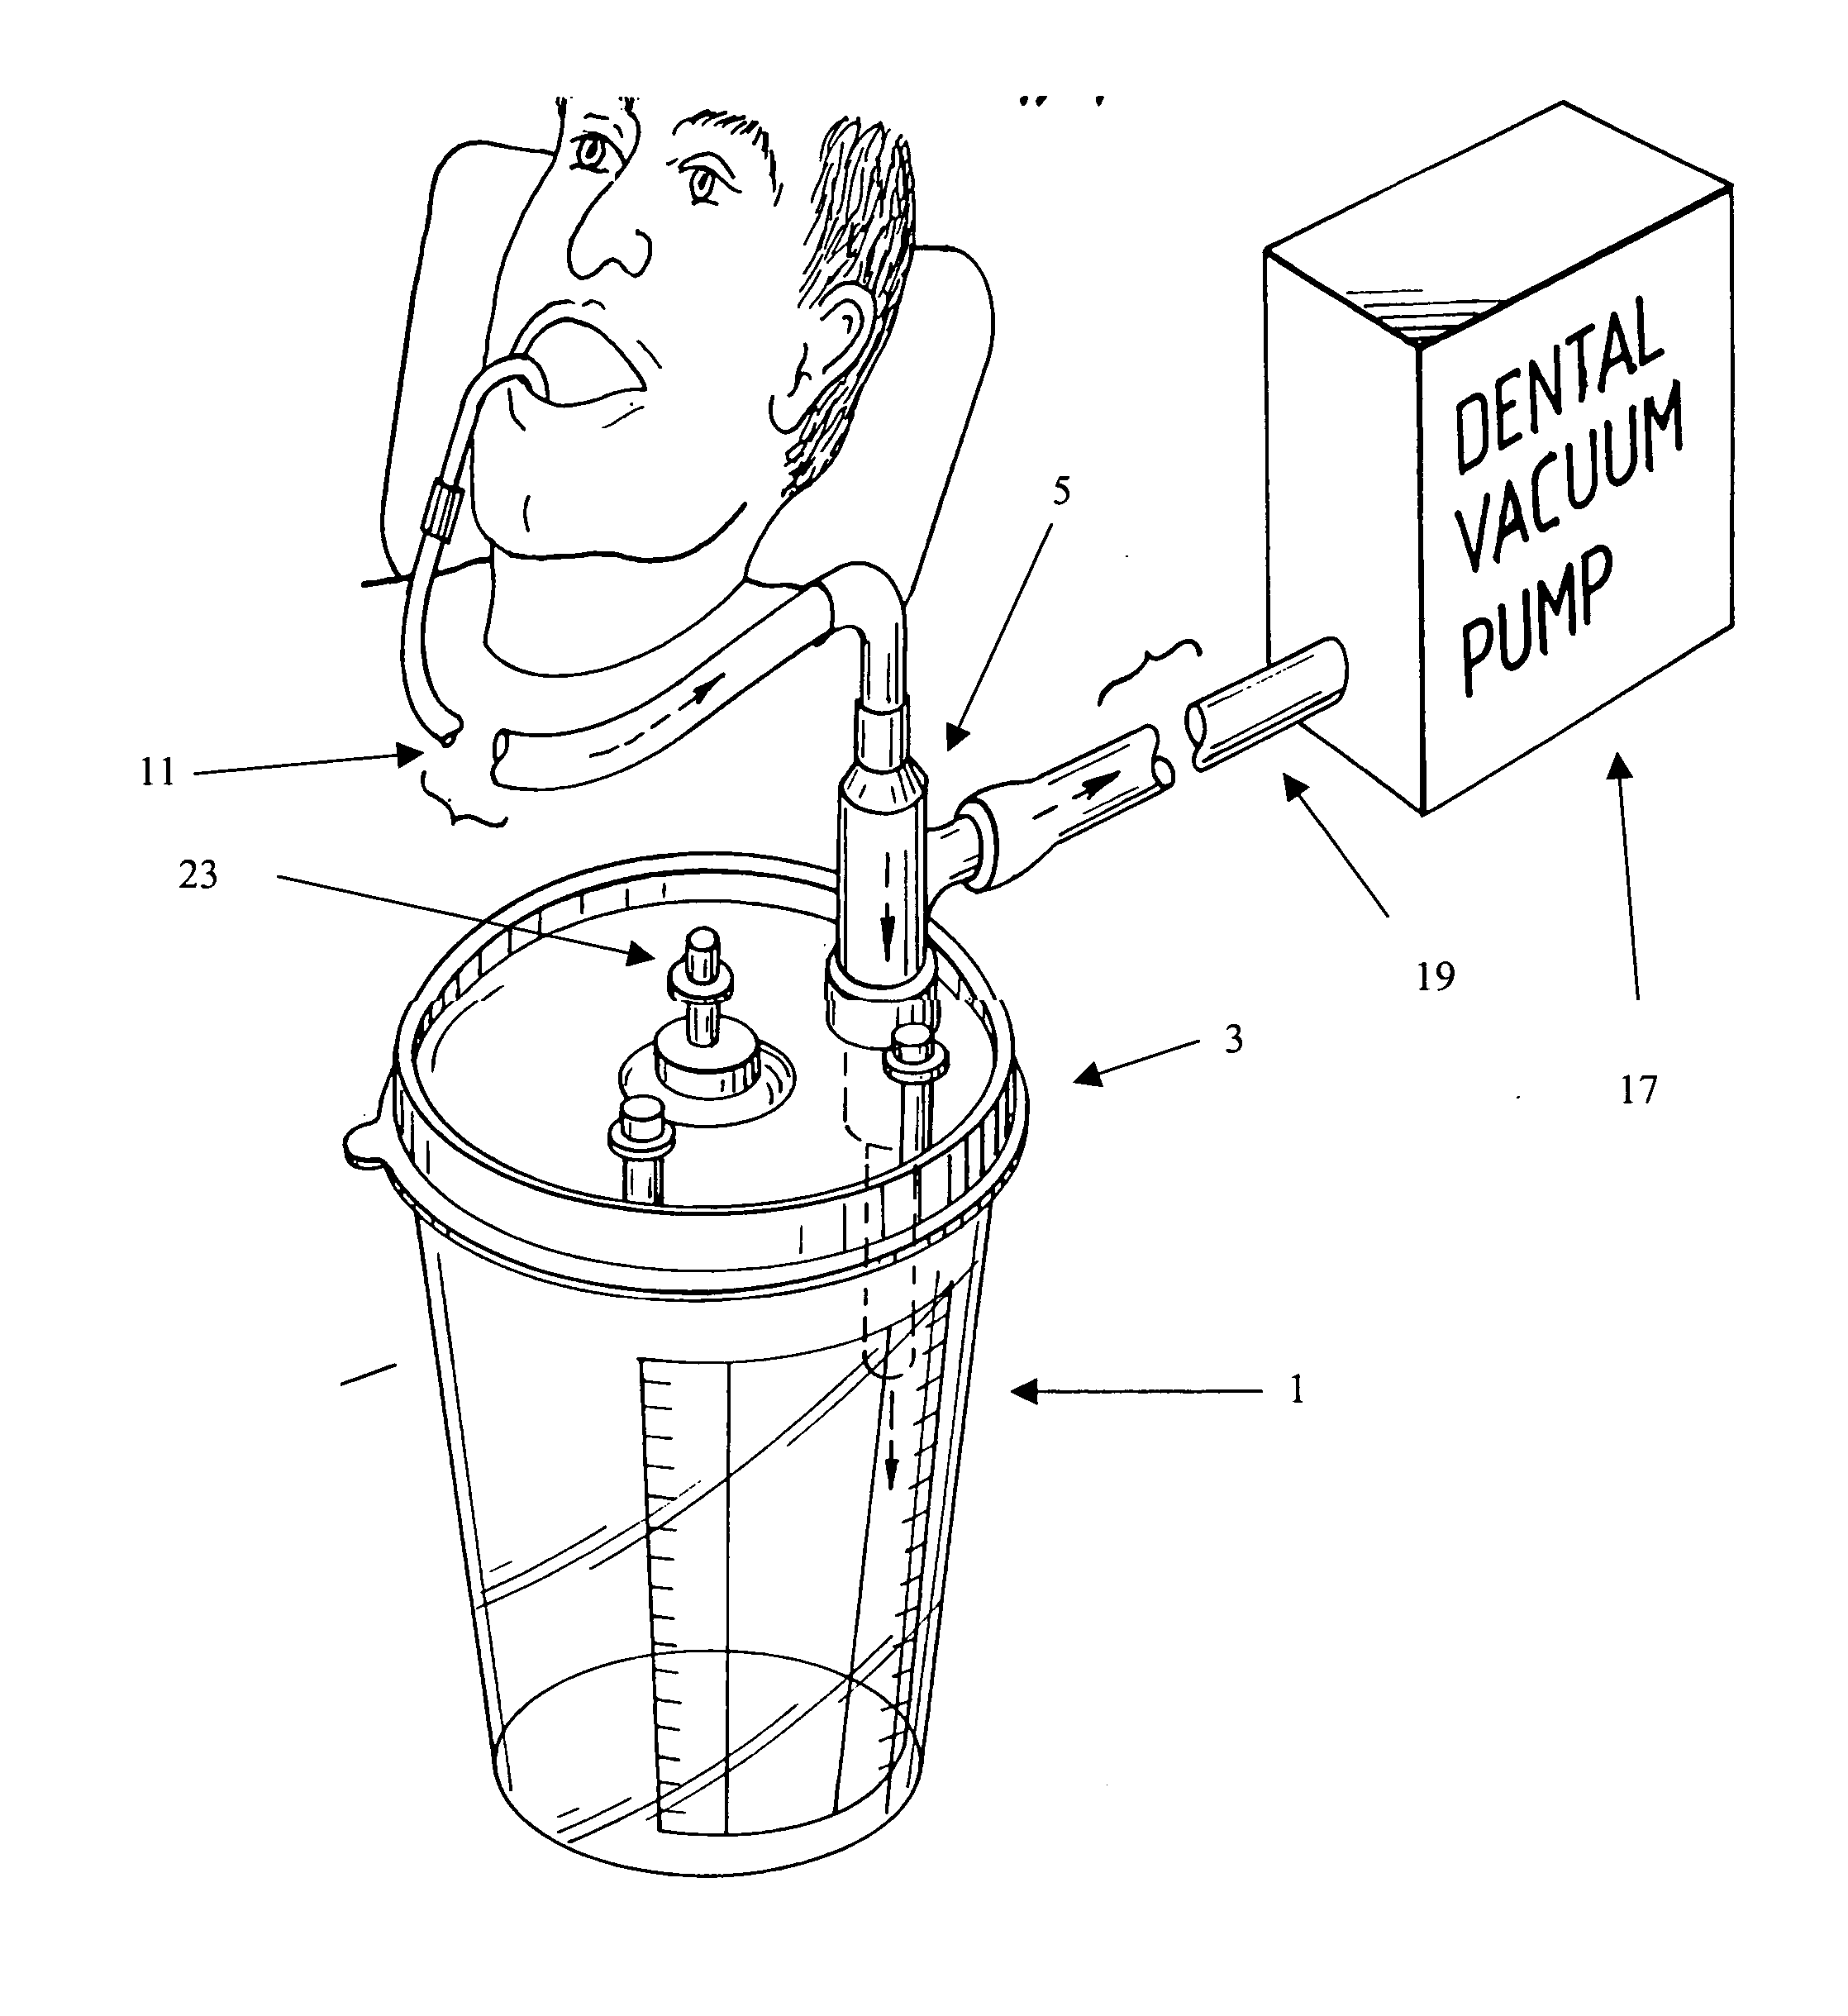 Chair side apparatus for the collection of dental wastewater